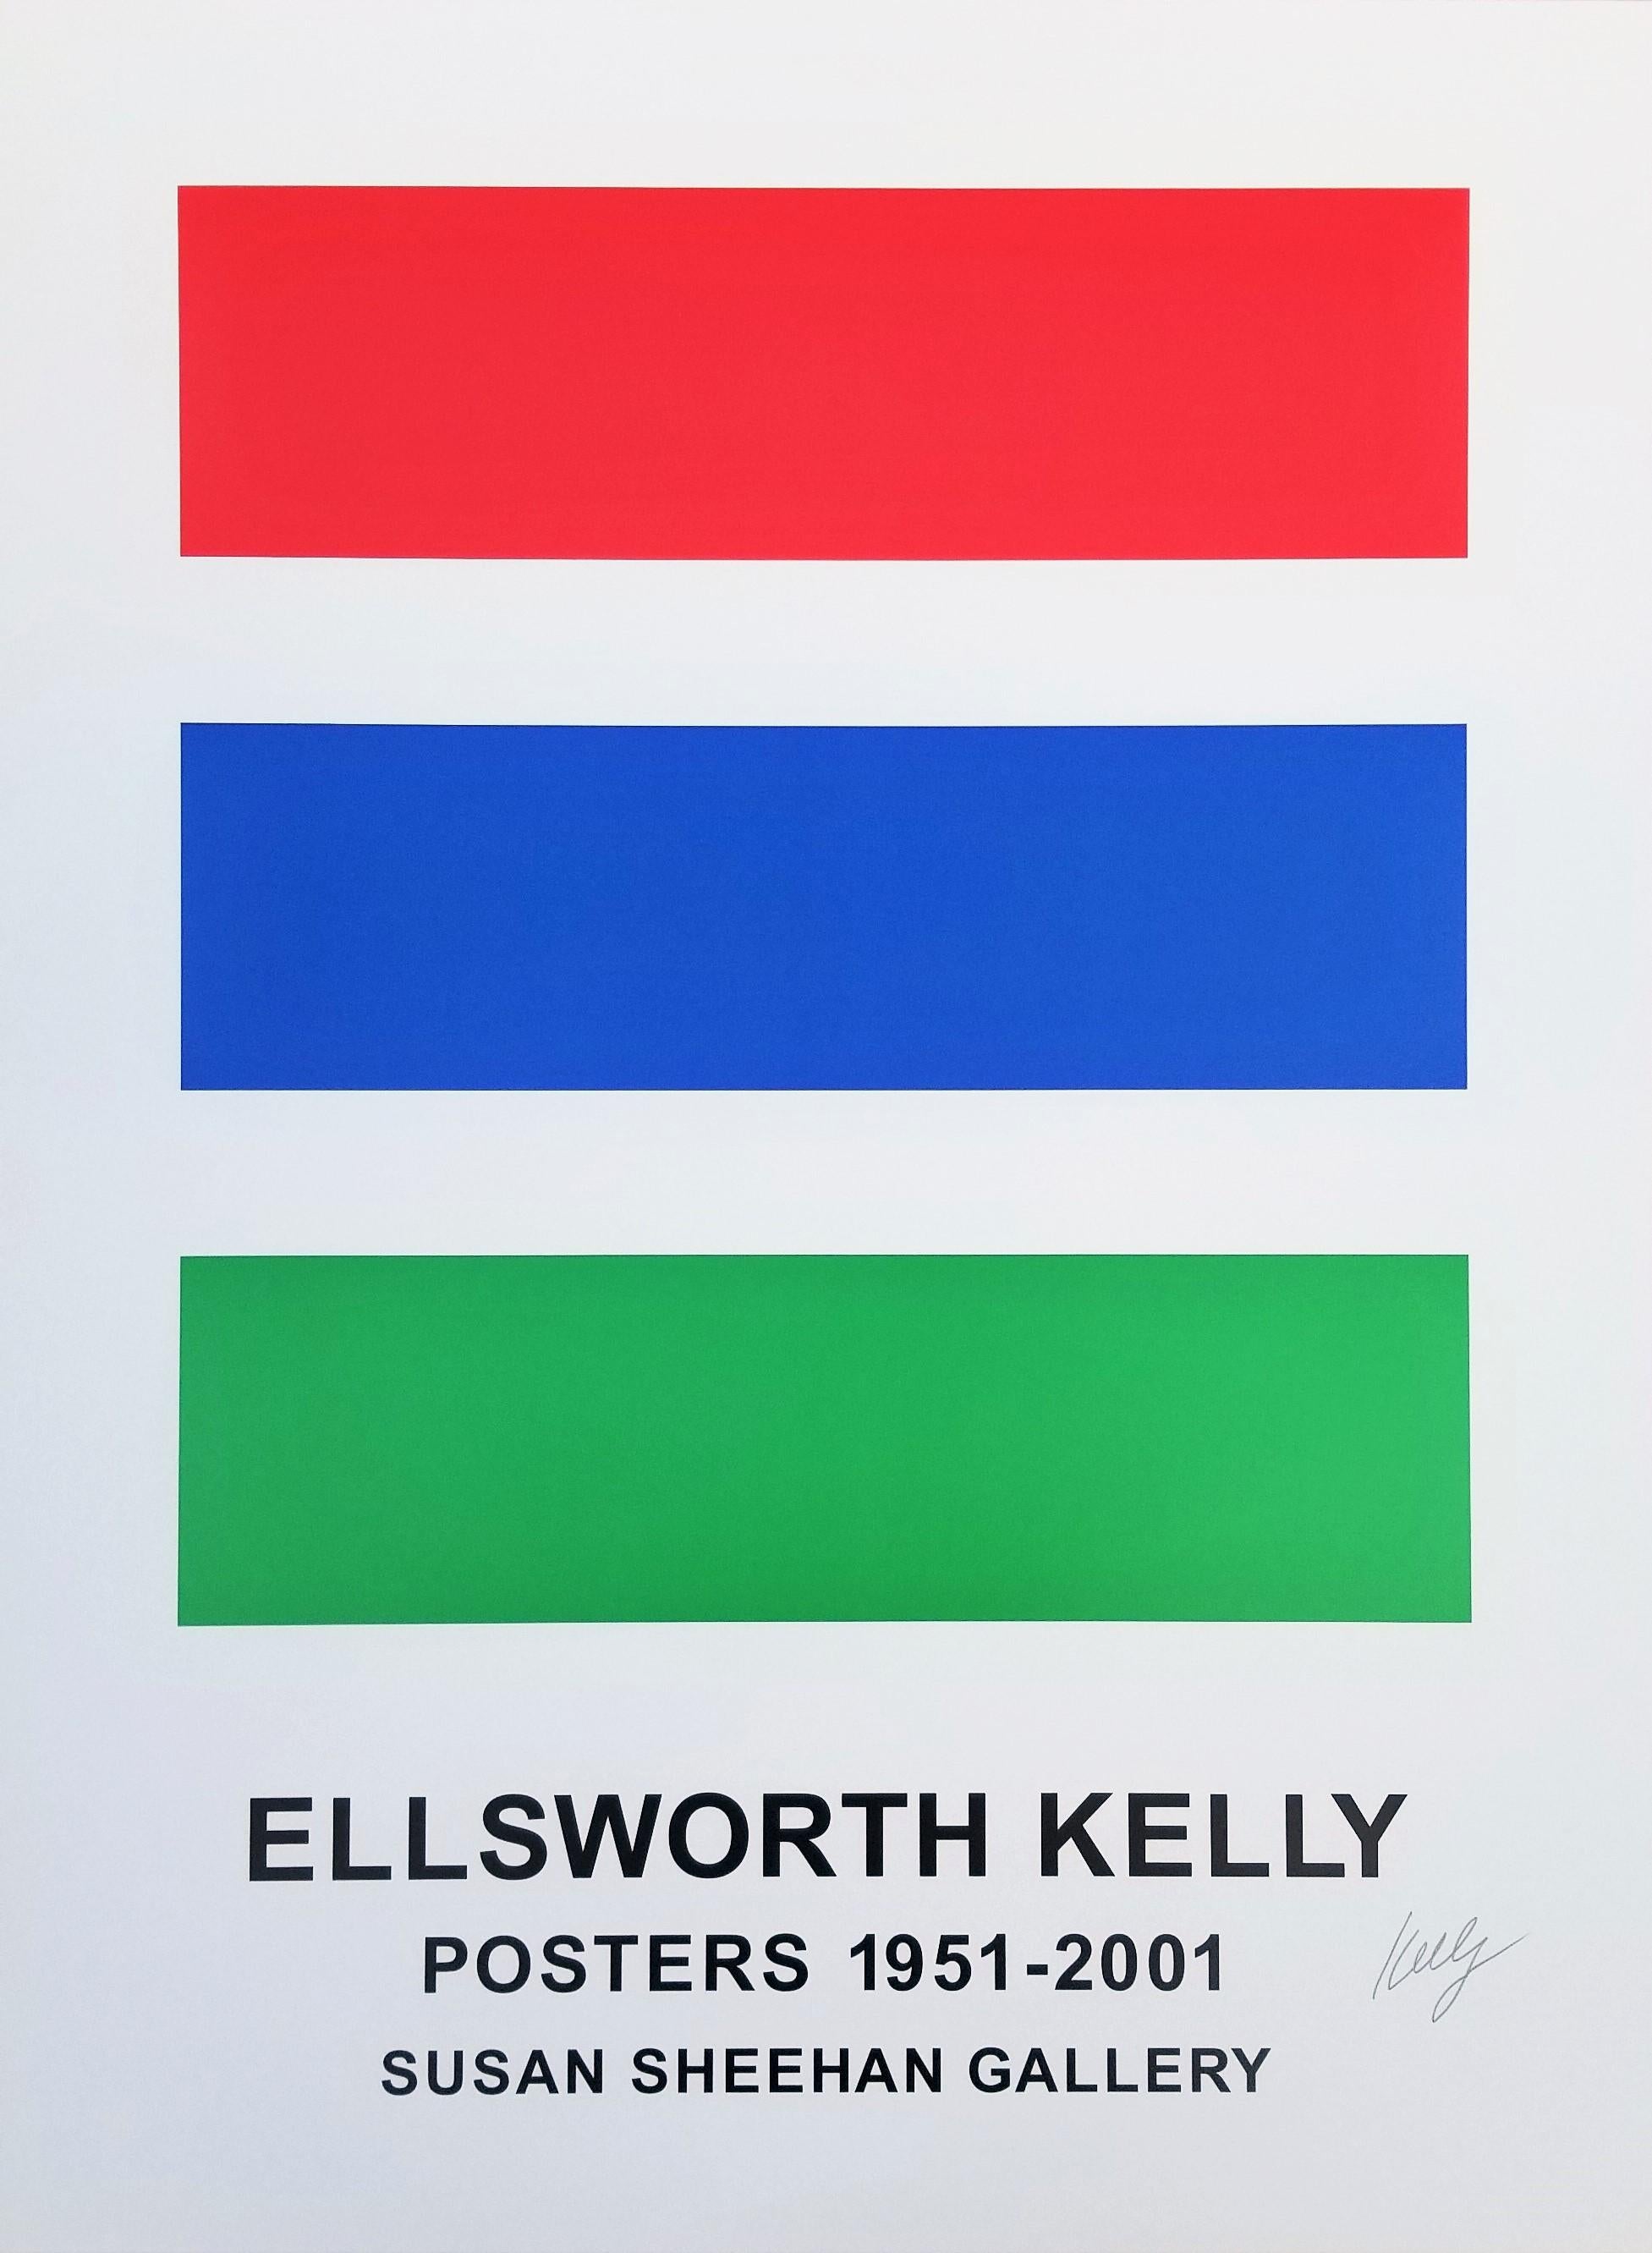 Susan Sheehan Gallery (Ellsworth Kelly Posters 1951-2001) Poster (Signed) Color